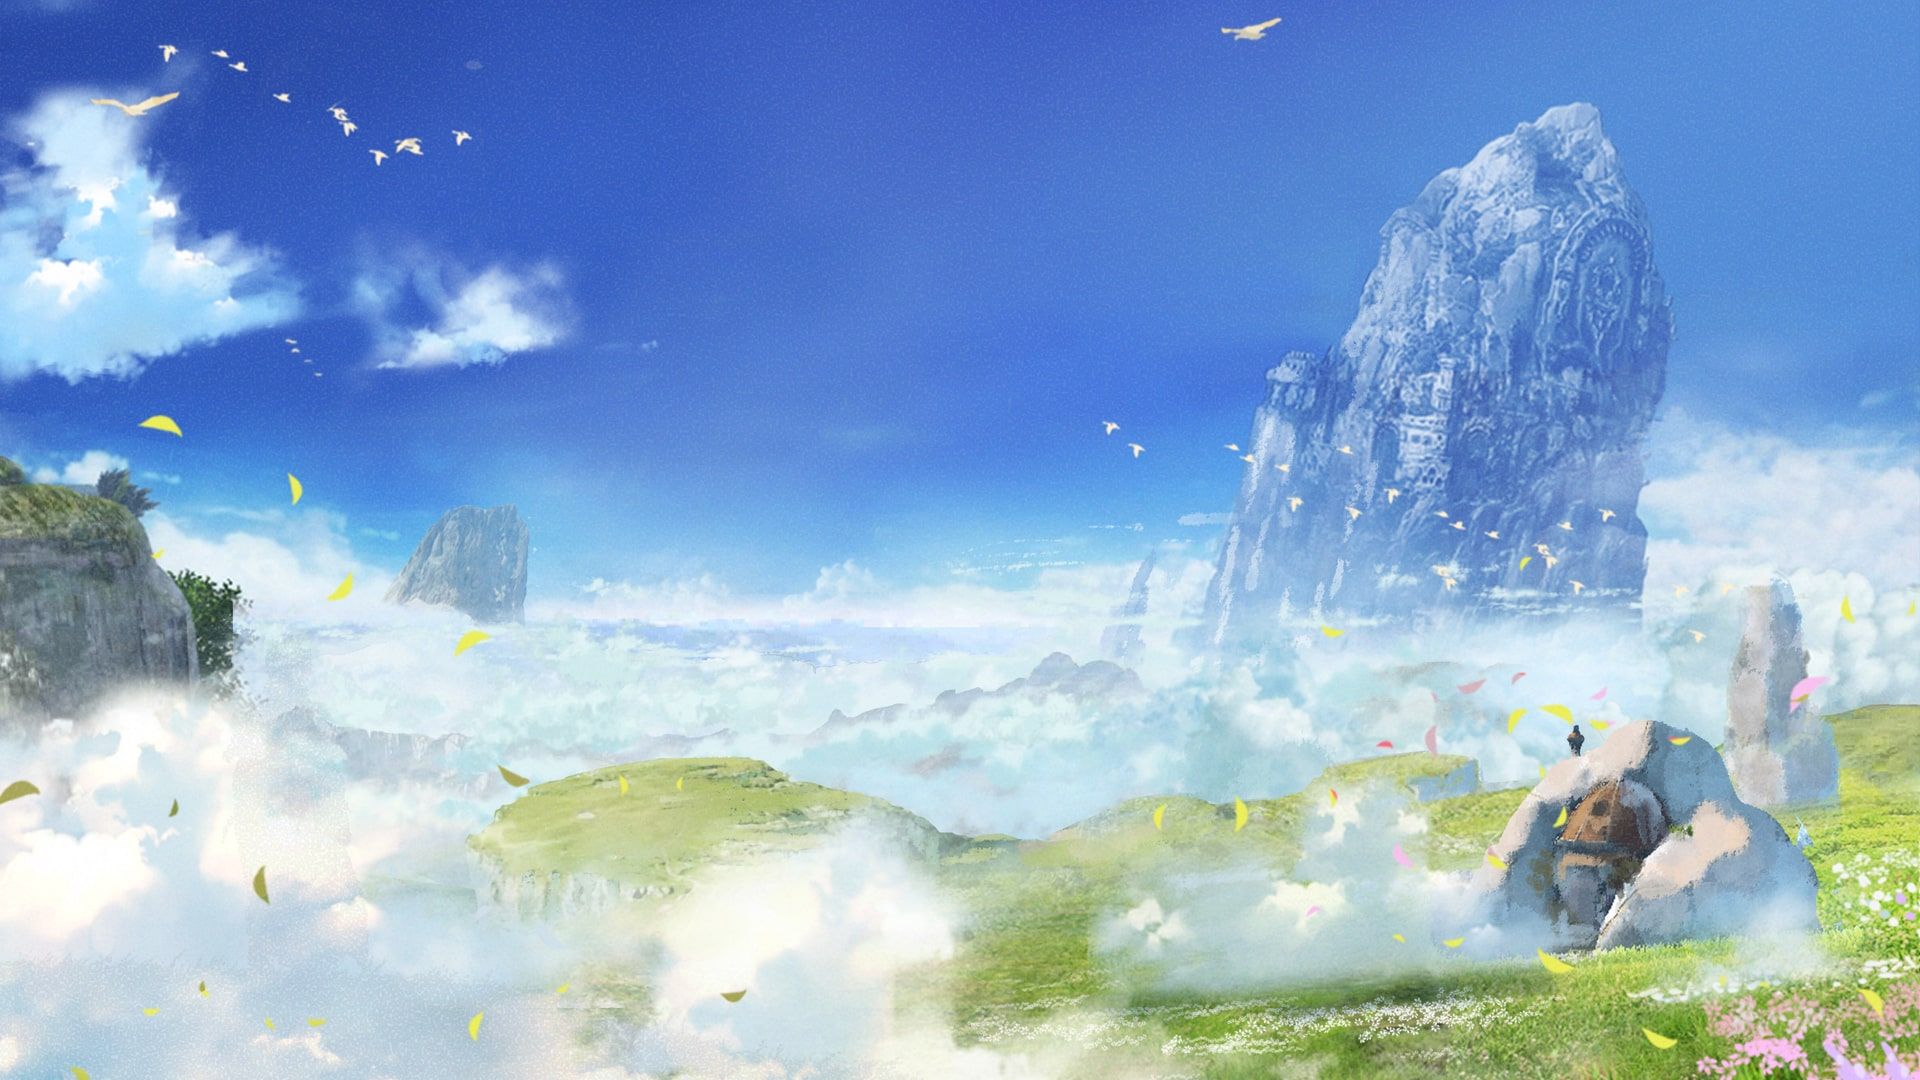 Tales of Zestiria cover image